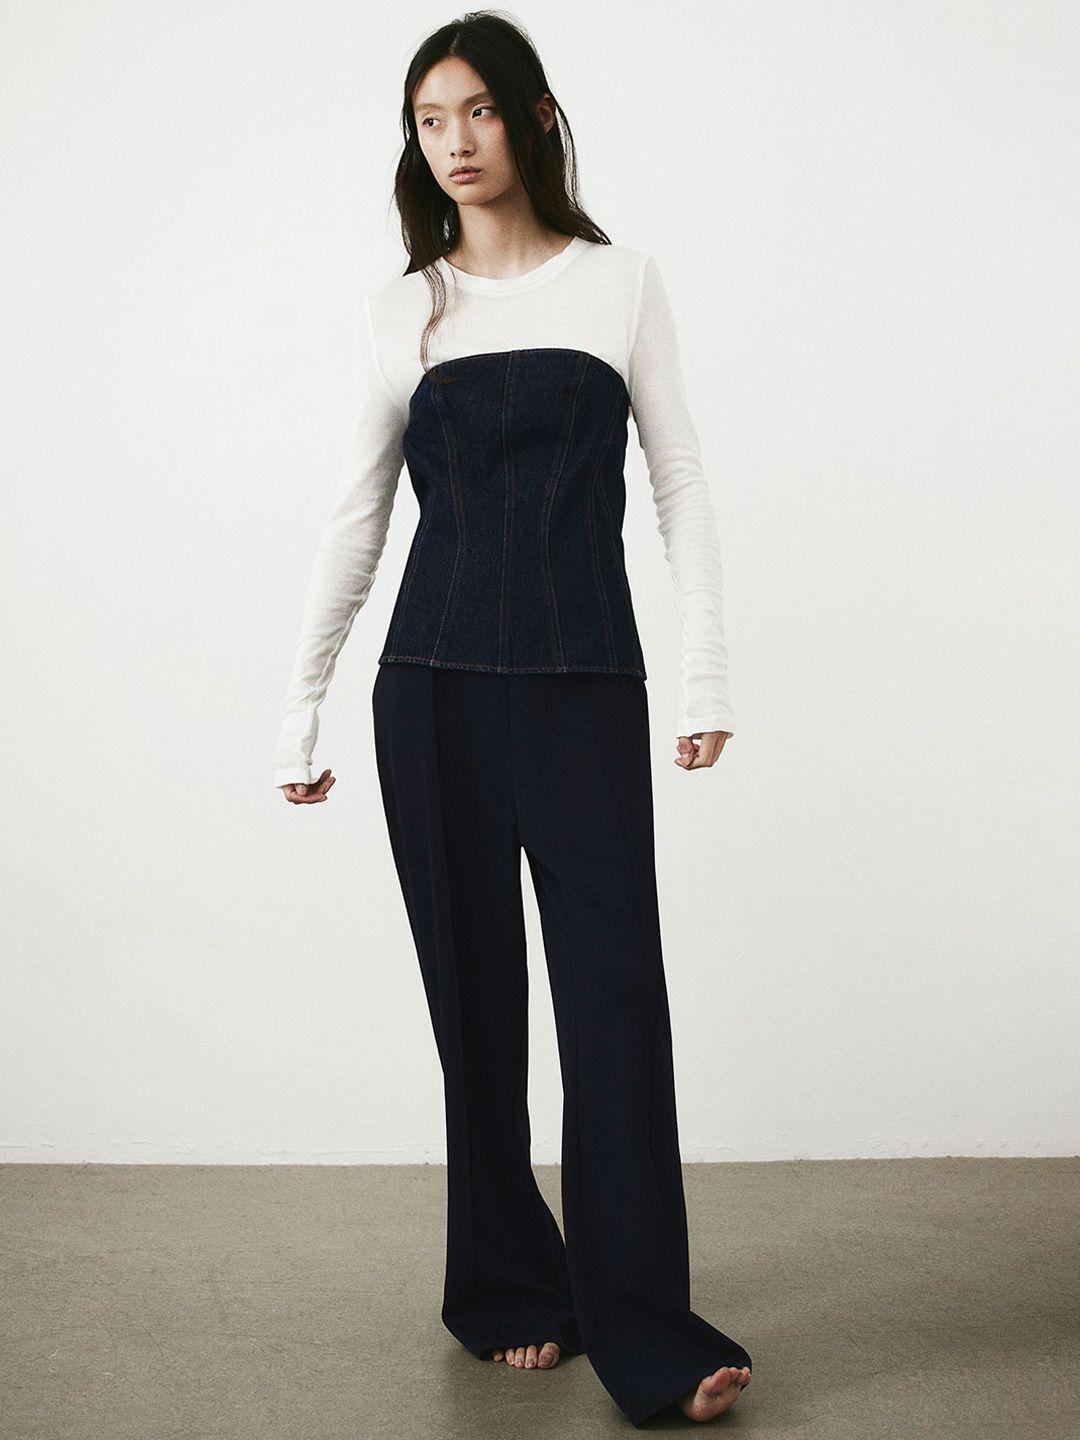 H&M High-Waisted Tailored Trousers